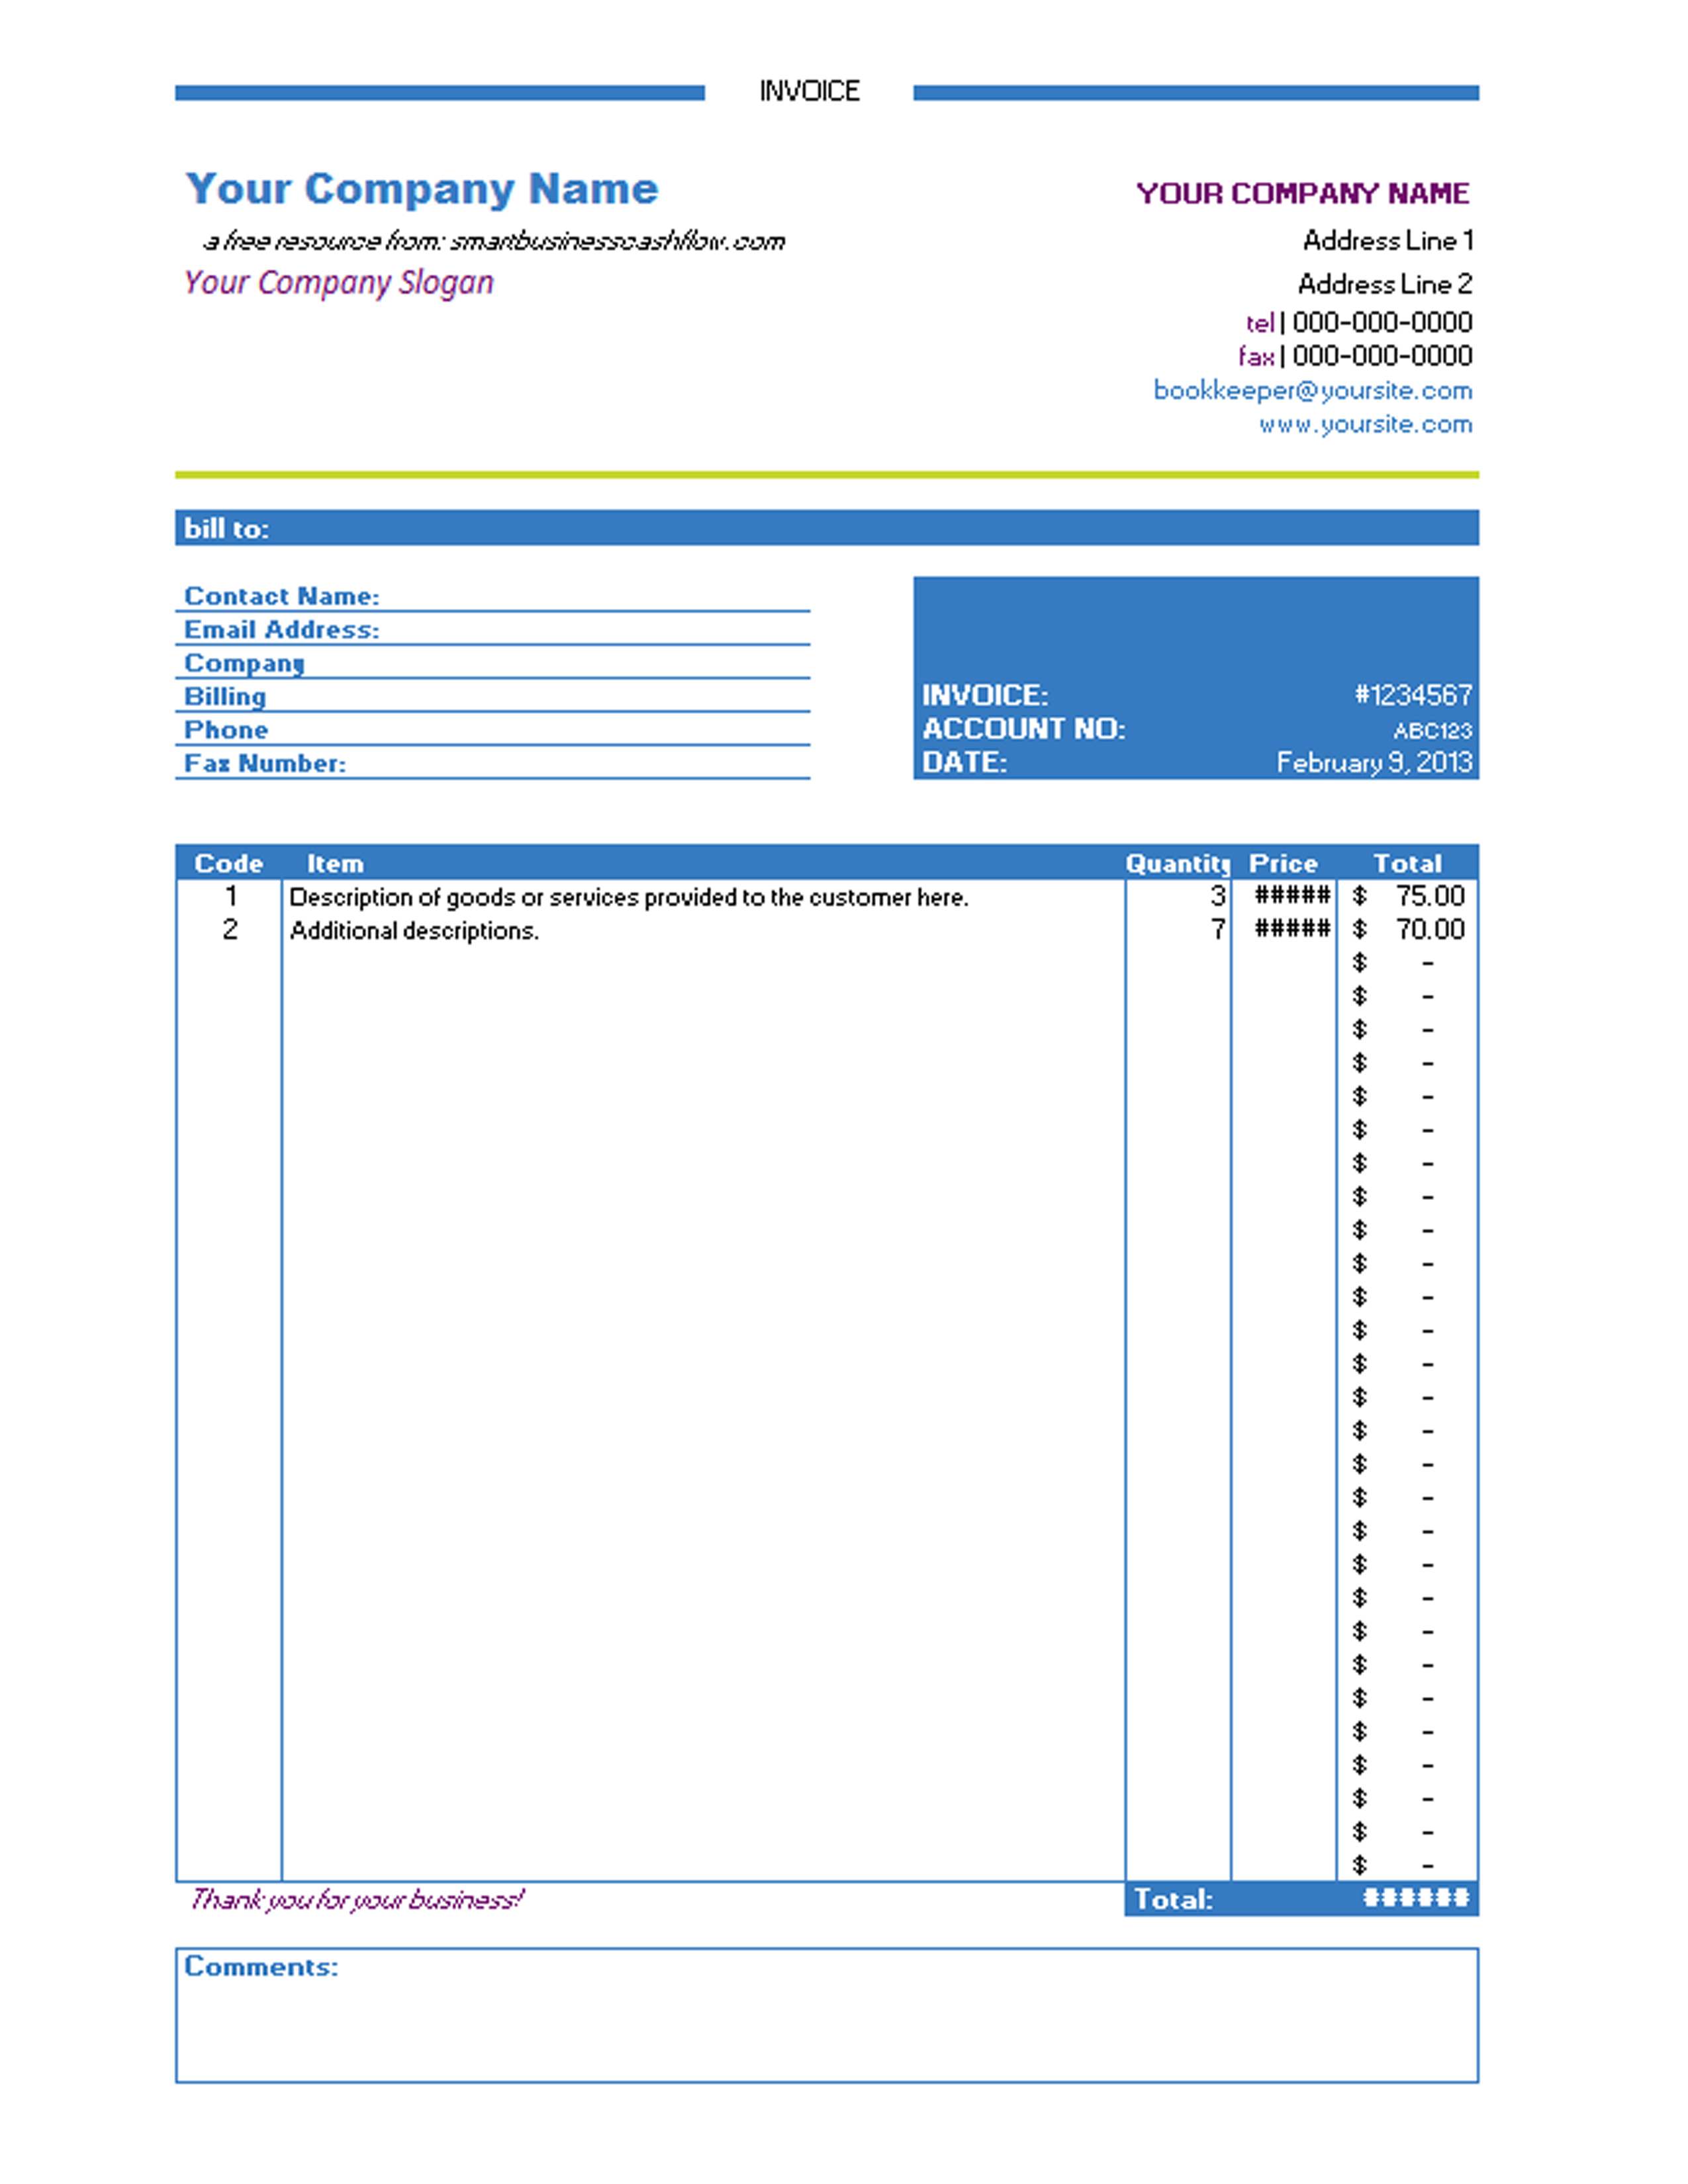 Subcontractor Invoice Template Excel Invoice Example